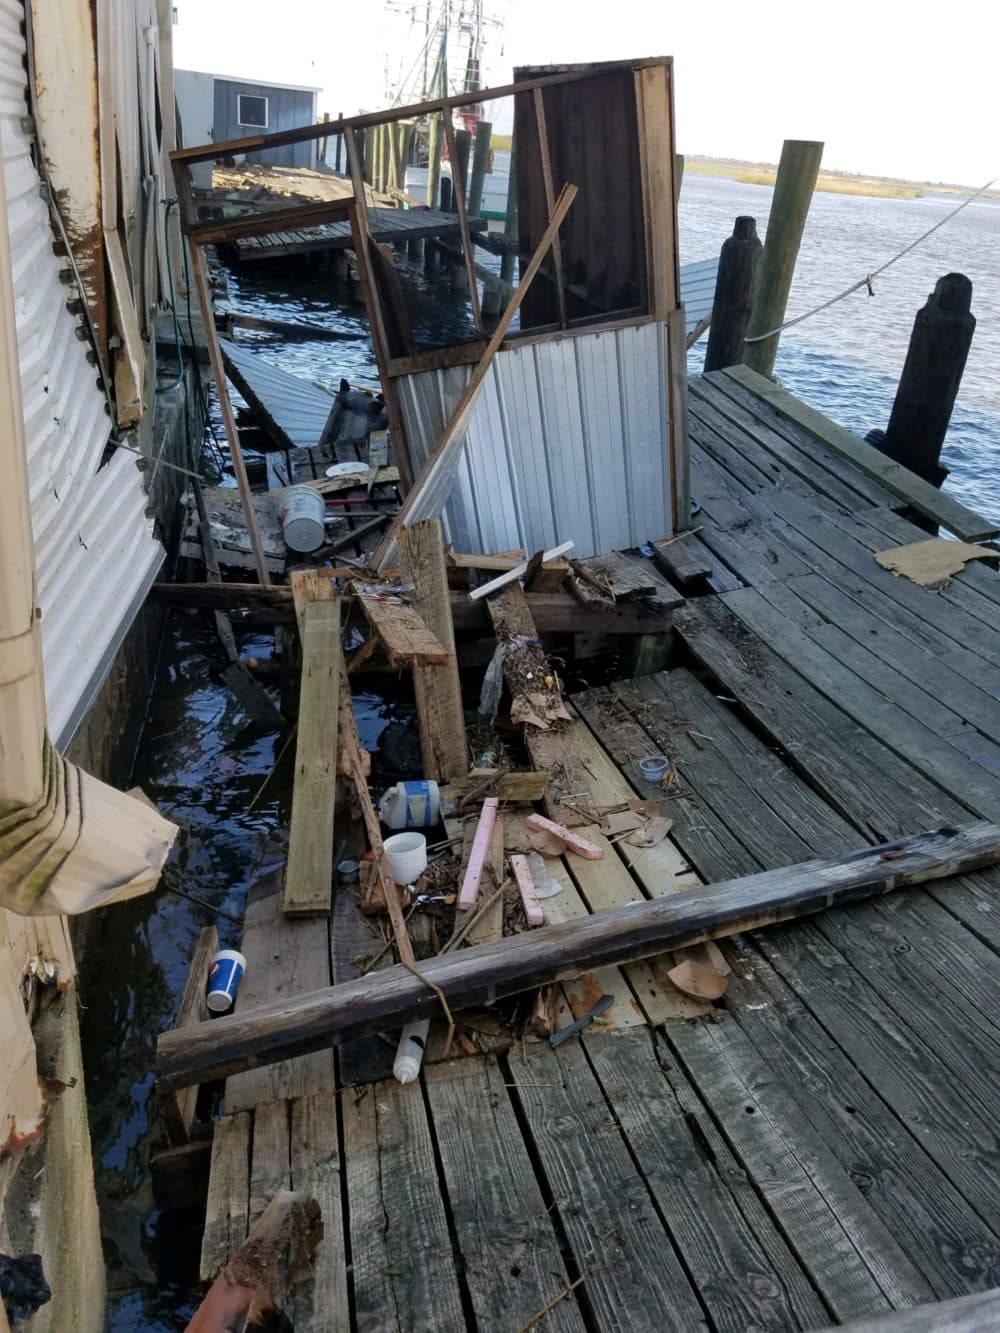 Part of Buddy Ward & Son's Seafood, owned by T.J. Ward's family, in Apalachicola, after Hurricane Michael swept through. (Courtesy T.J. Ward)